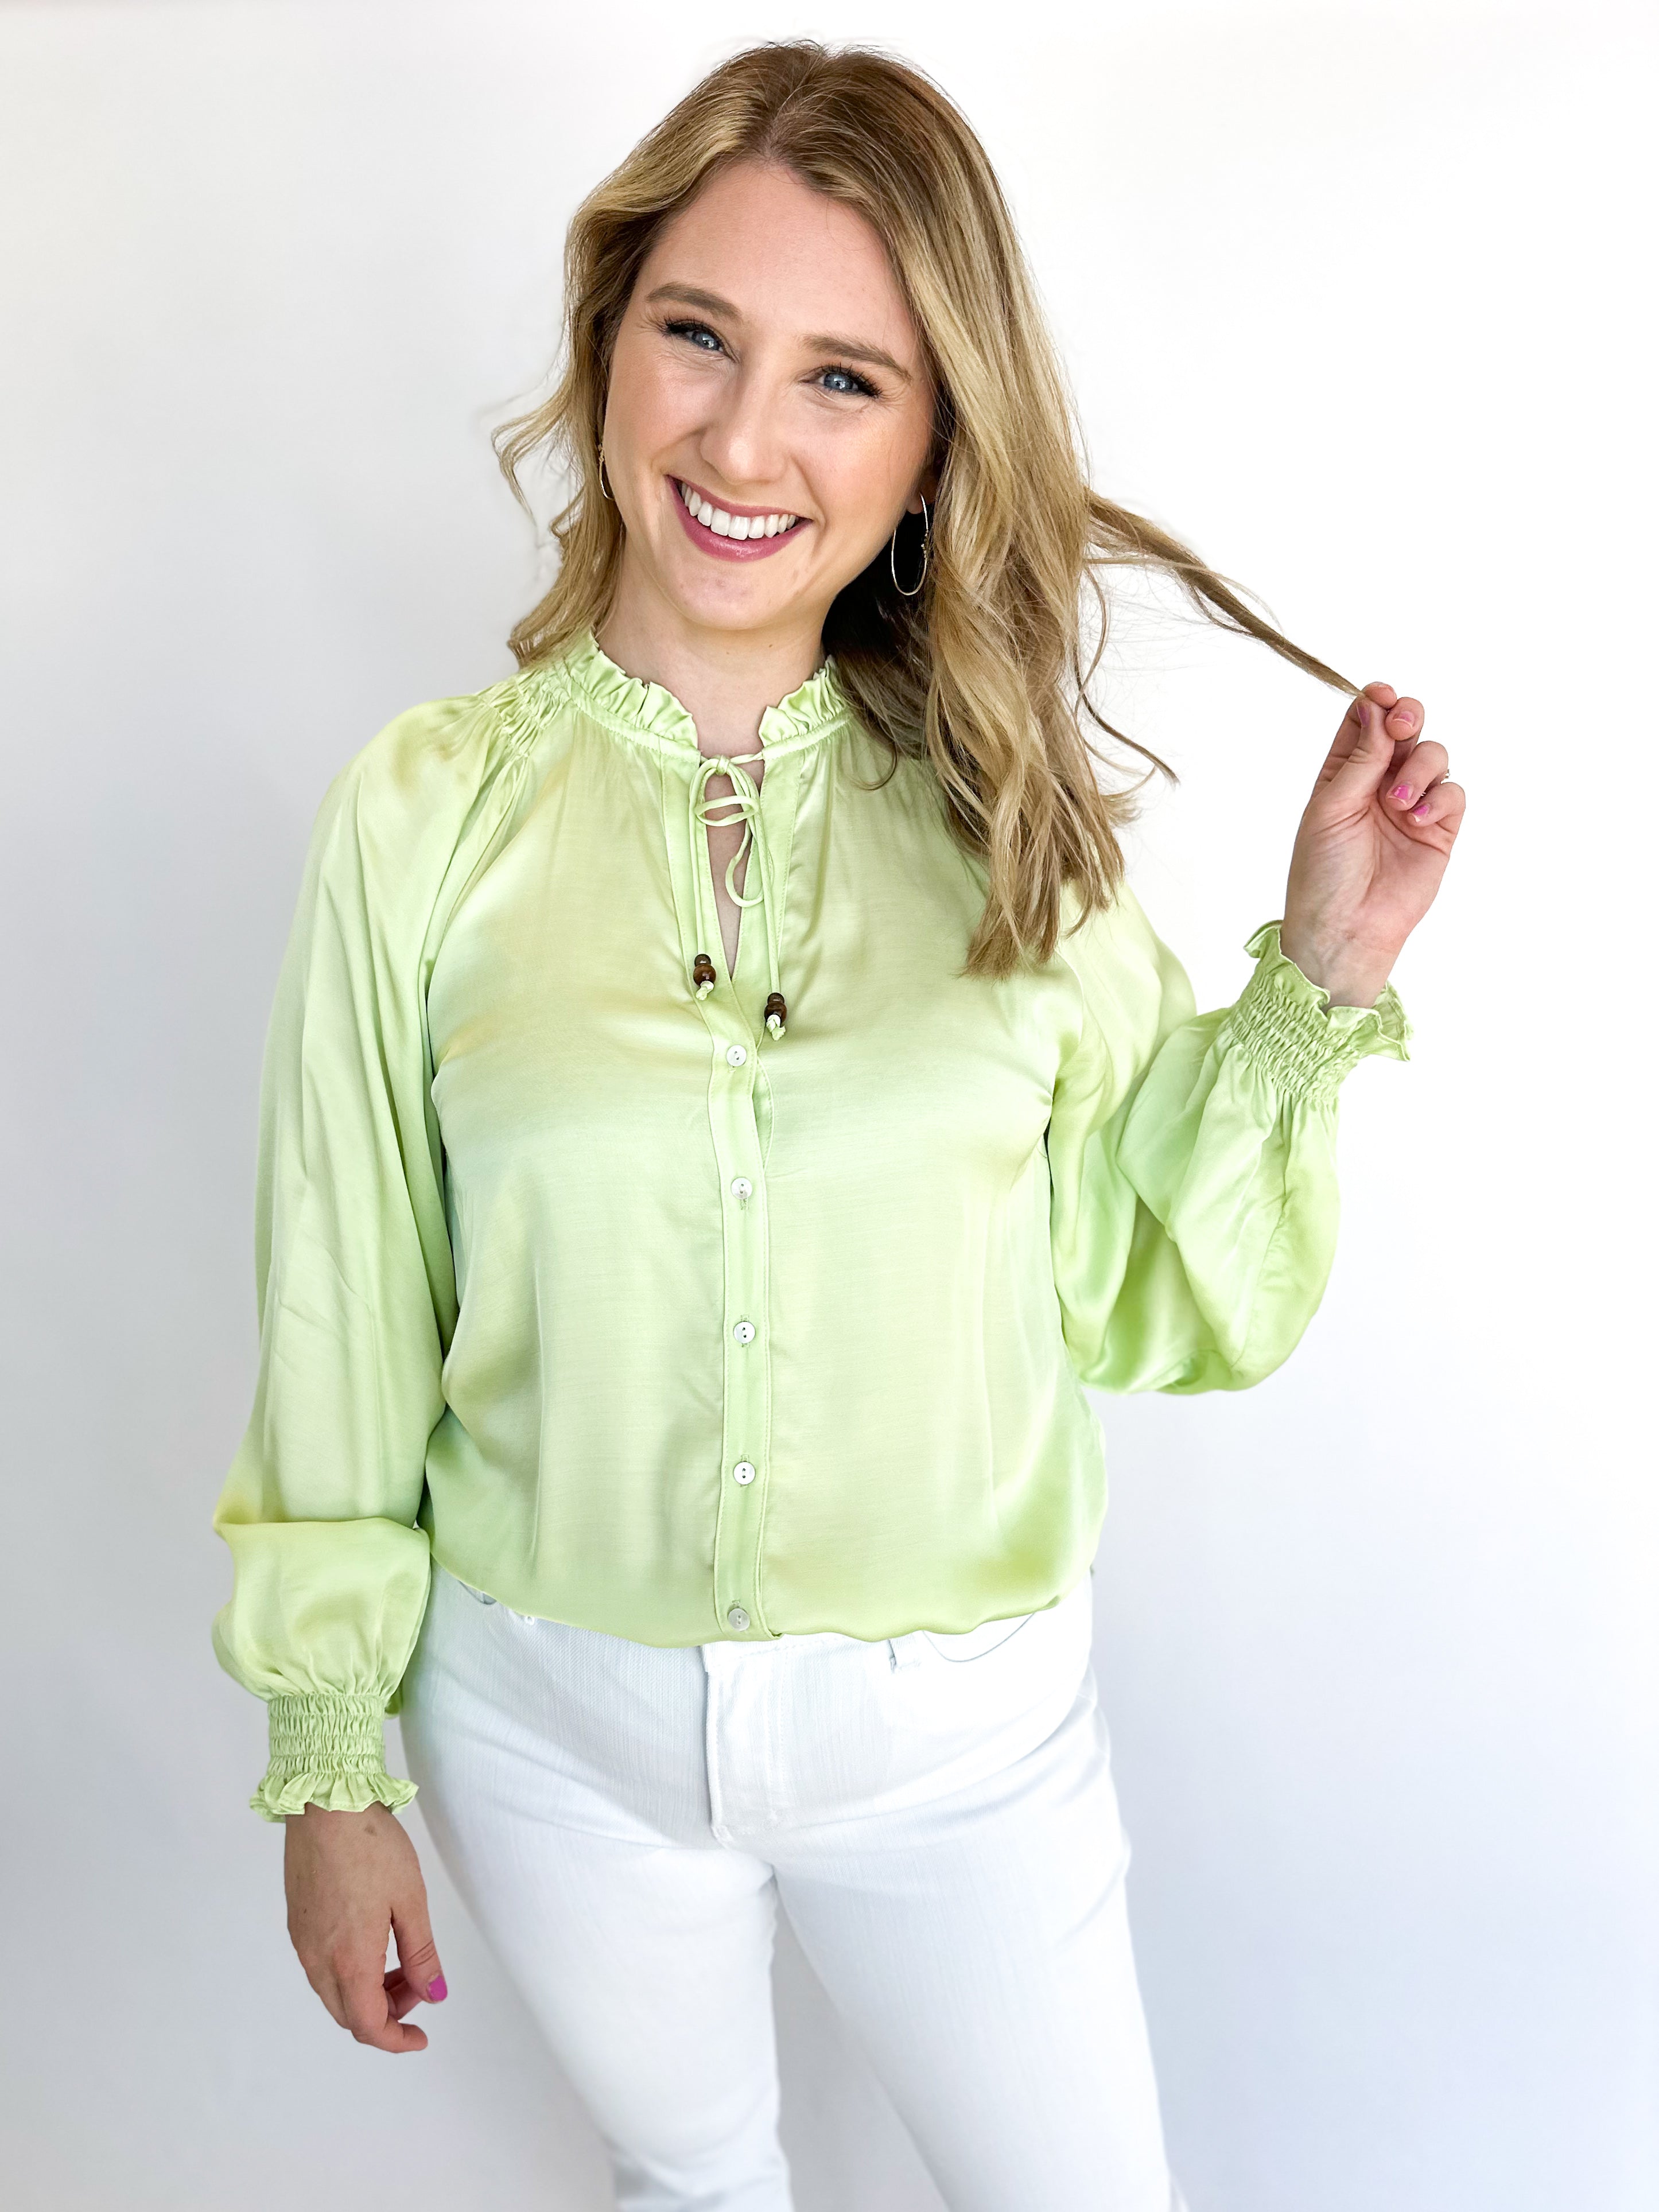 Pastel Satin Blouse - Lime-200 Fashion Blouses-OLIVACEOUS-July & June Women's Fashion Boutique Located in San Antonio, Texas